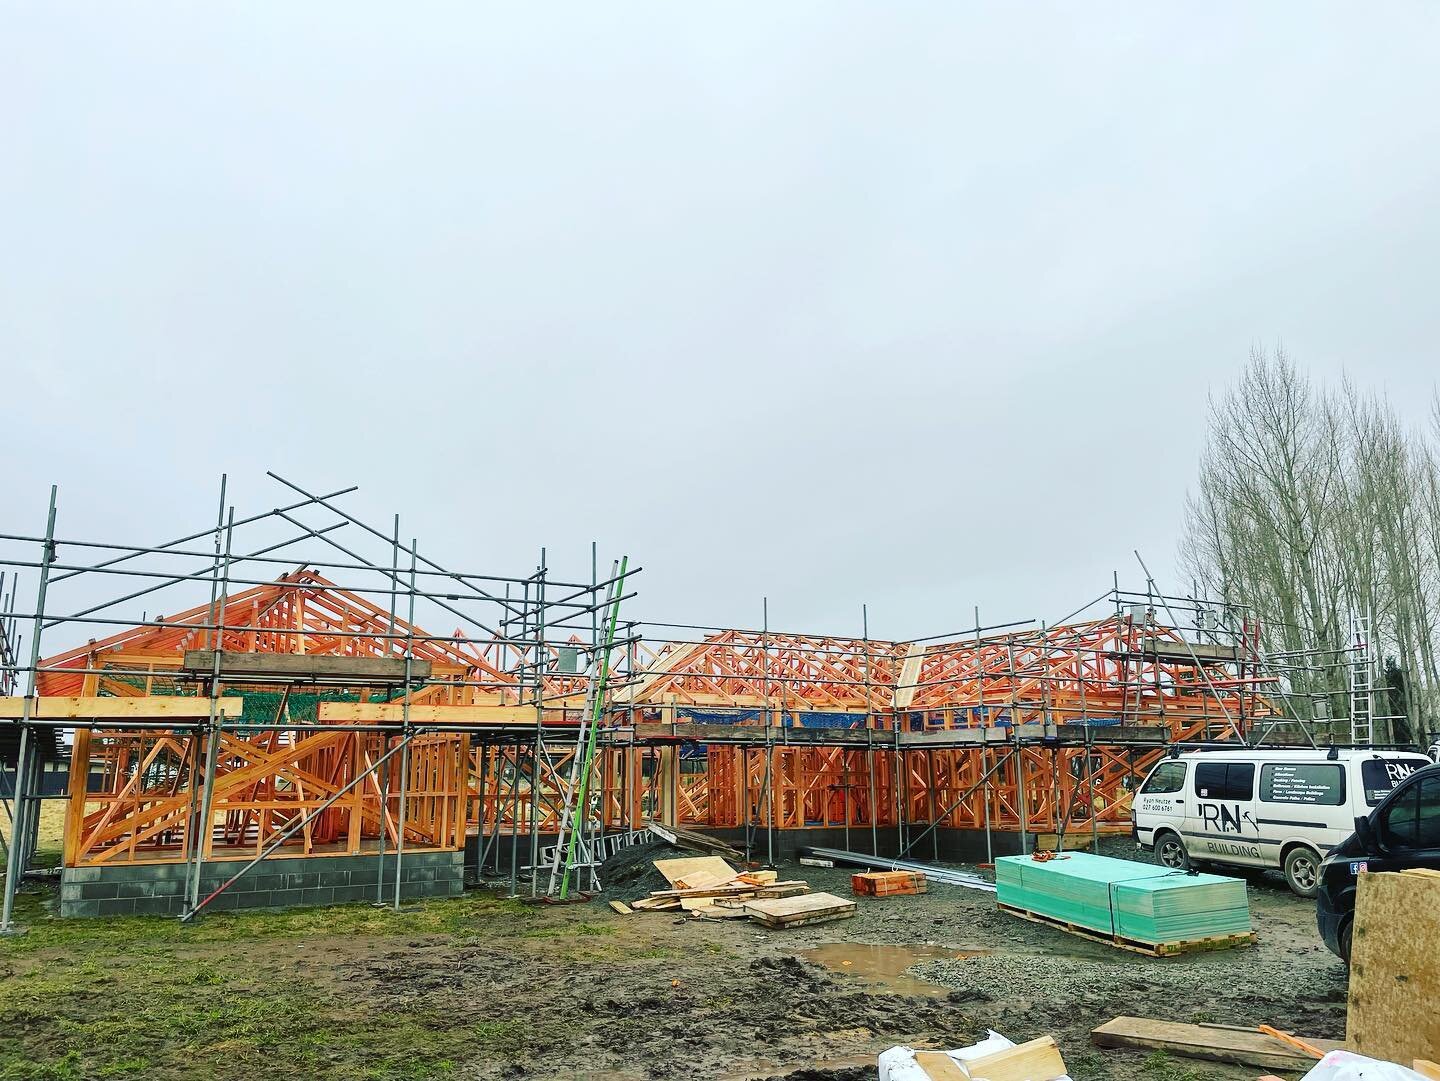 Rhys and the crew have been busy on the roof framing. This time next week with abit of help from the weather we will have a roof installed.